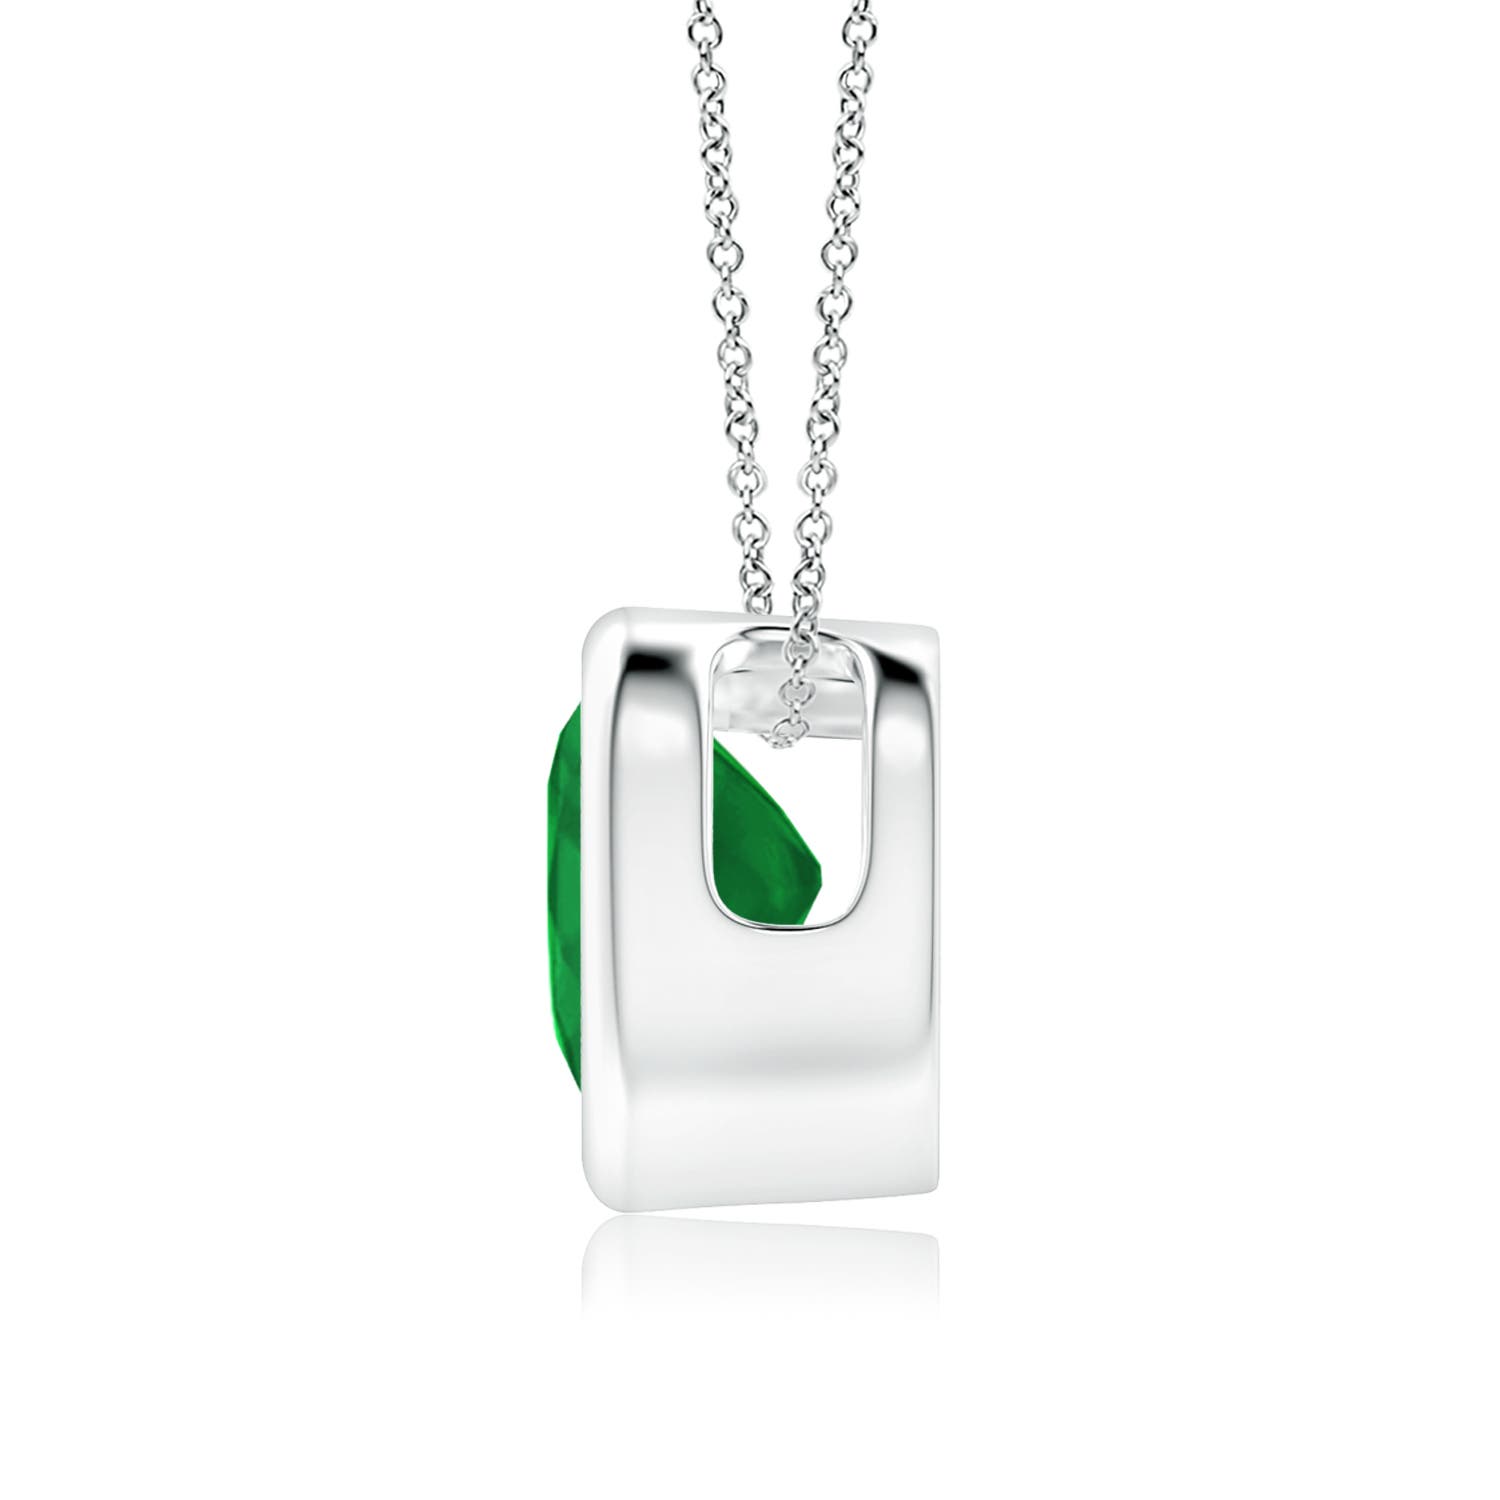 A - Emerald / 0.6 CT / 14 KT White Gold